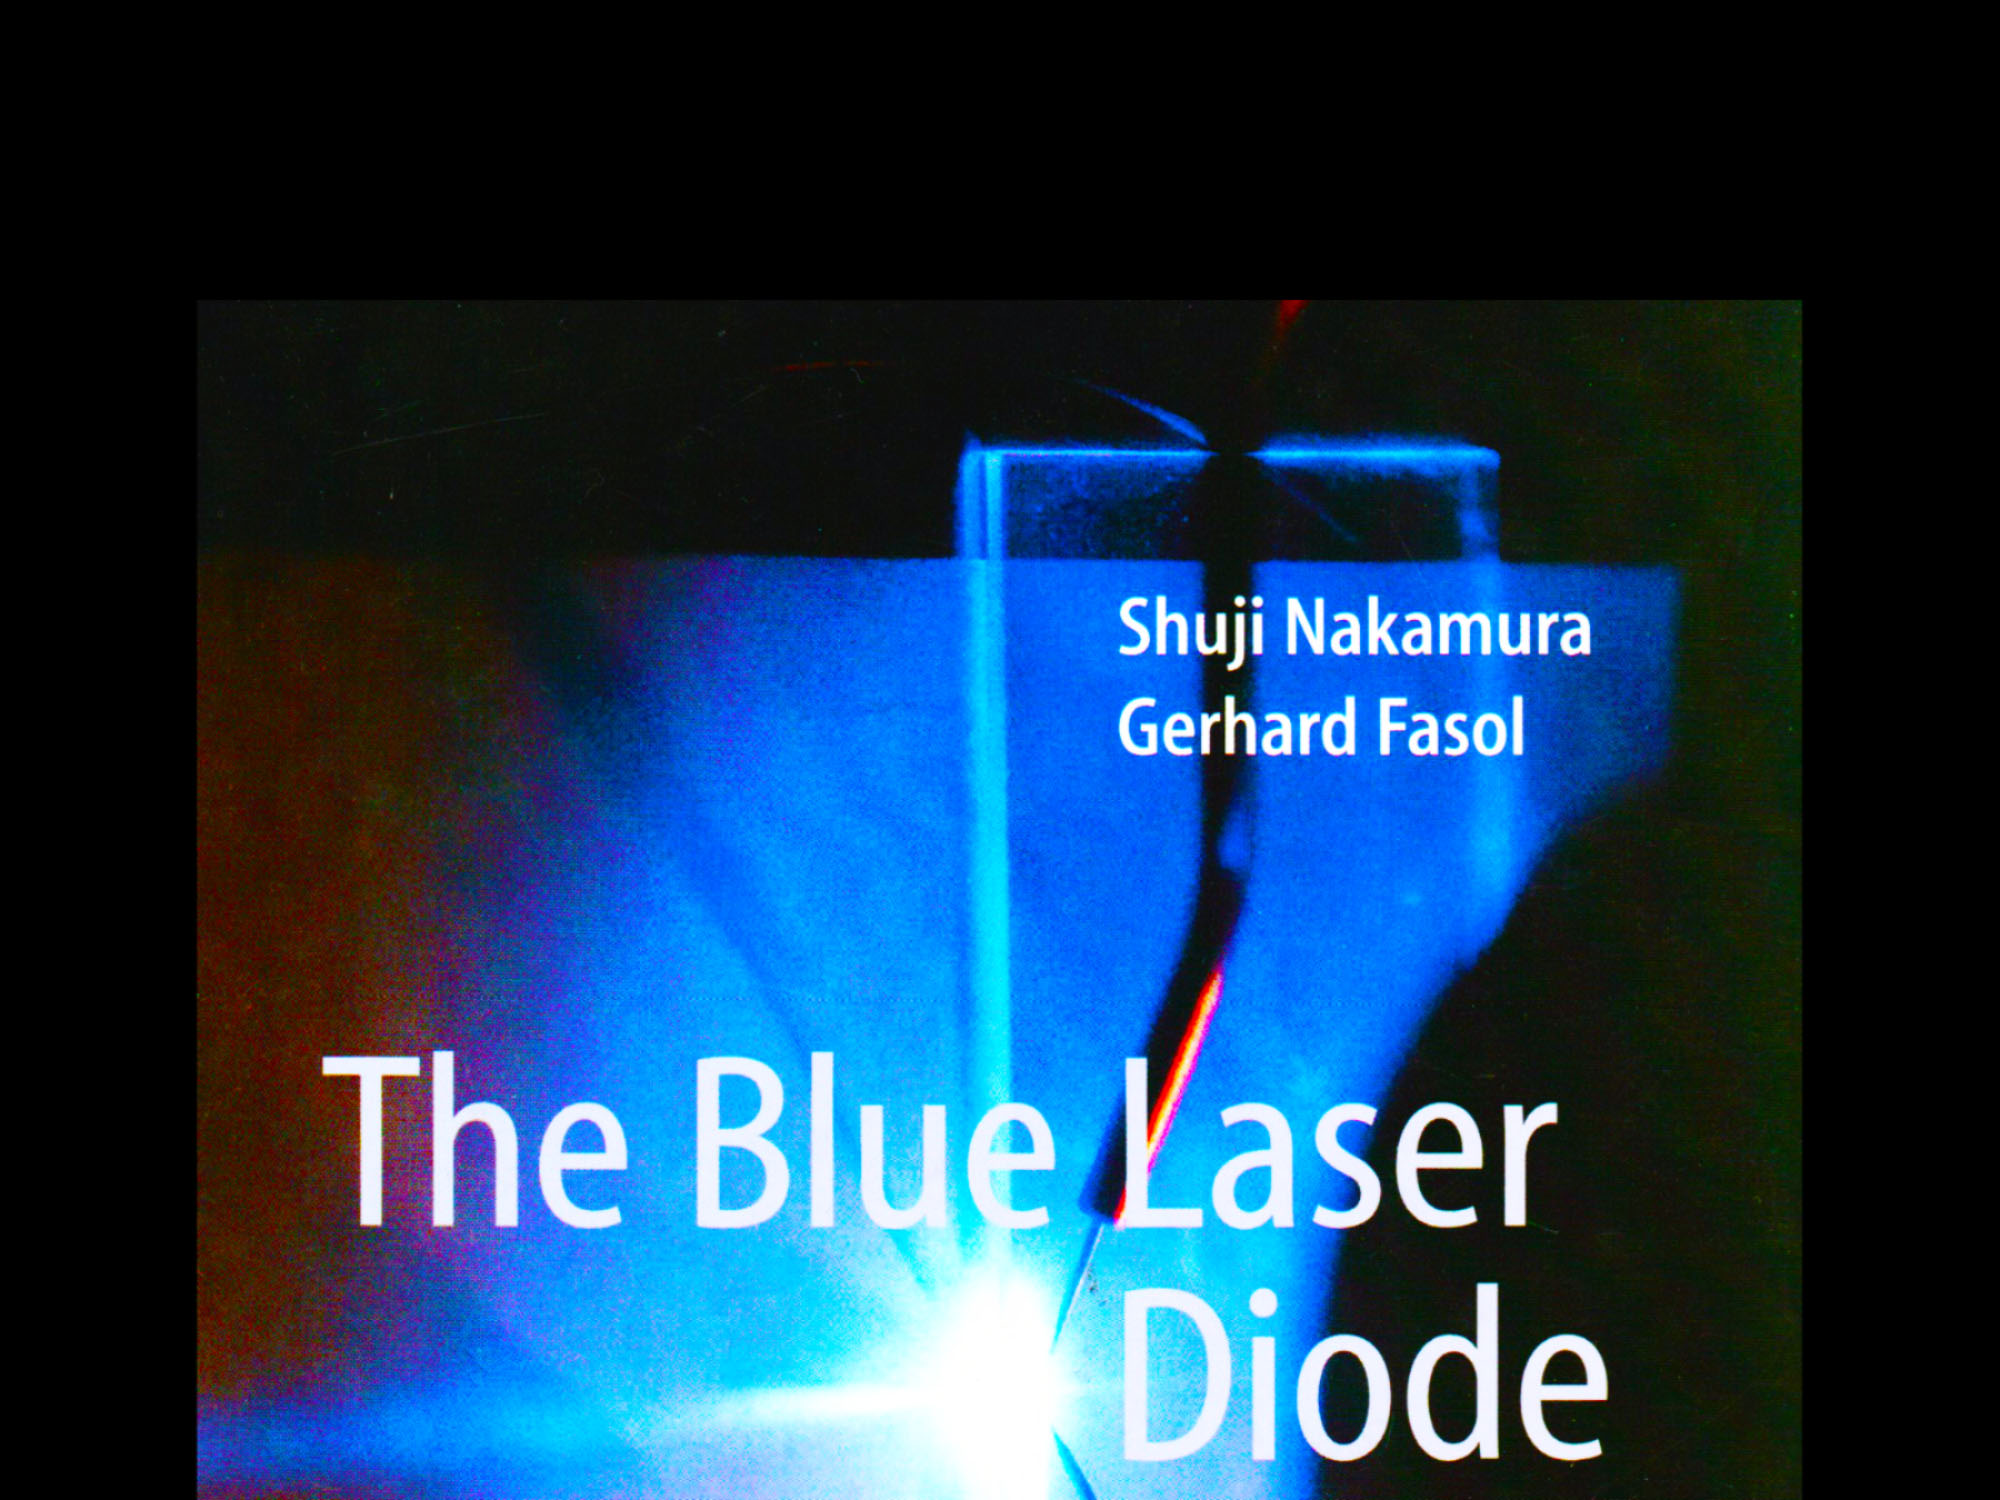 Blue laser book with Shuji Nakamura – how this book came about